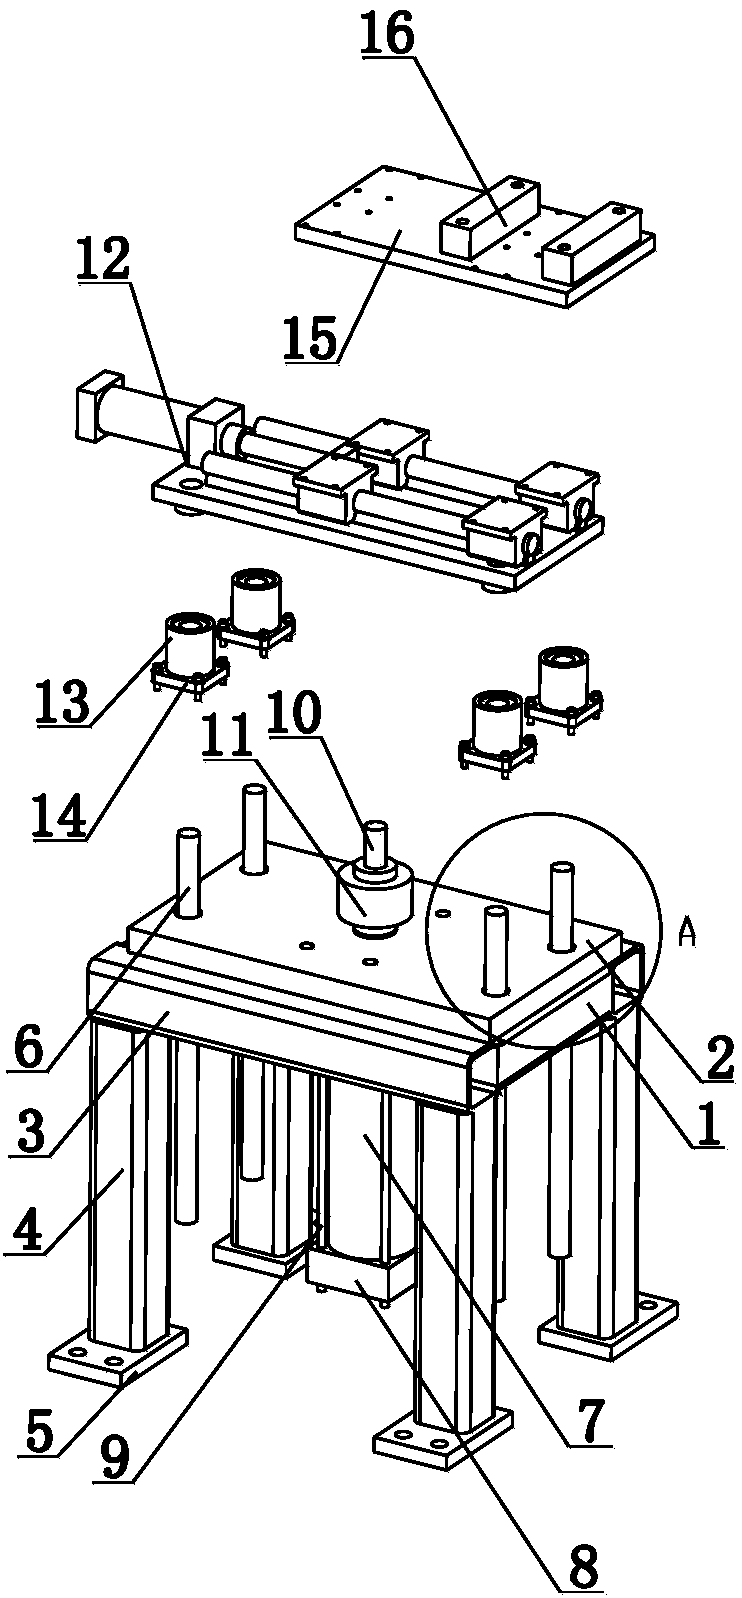 Omni-directional regulation and control device for collimator